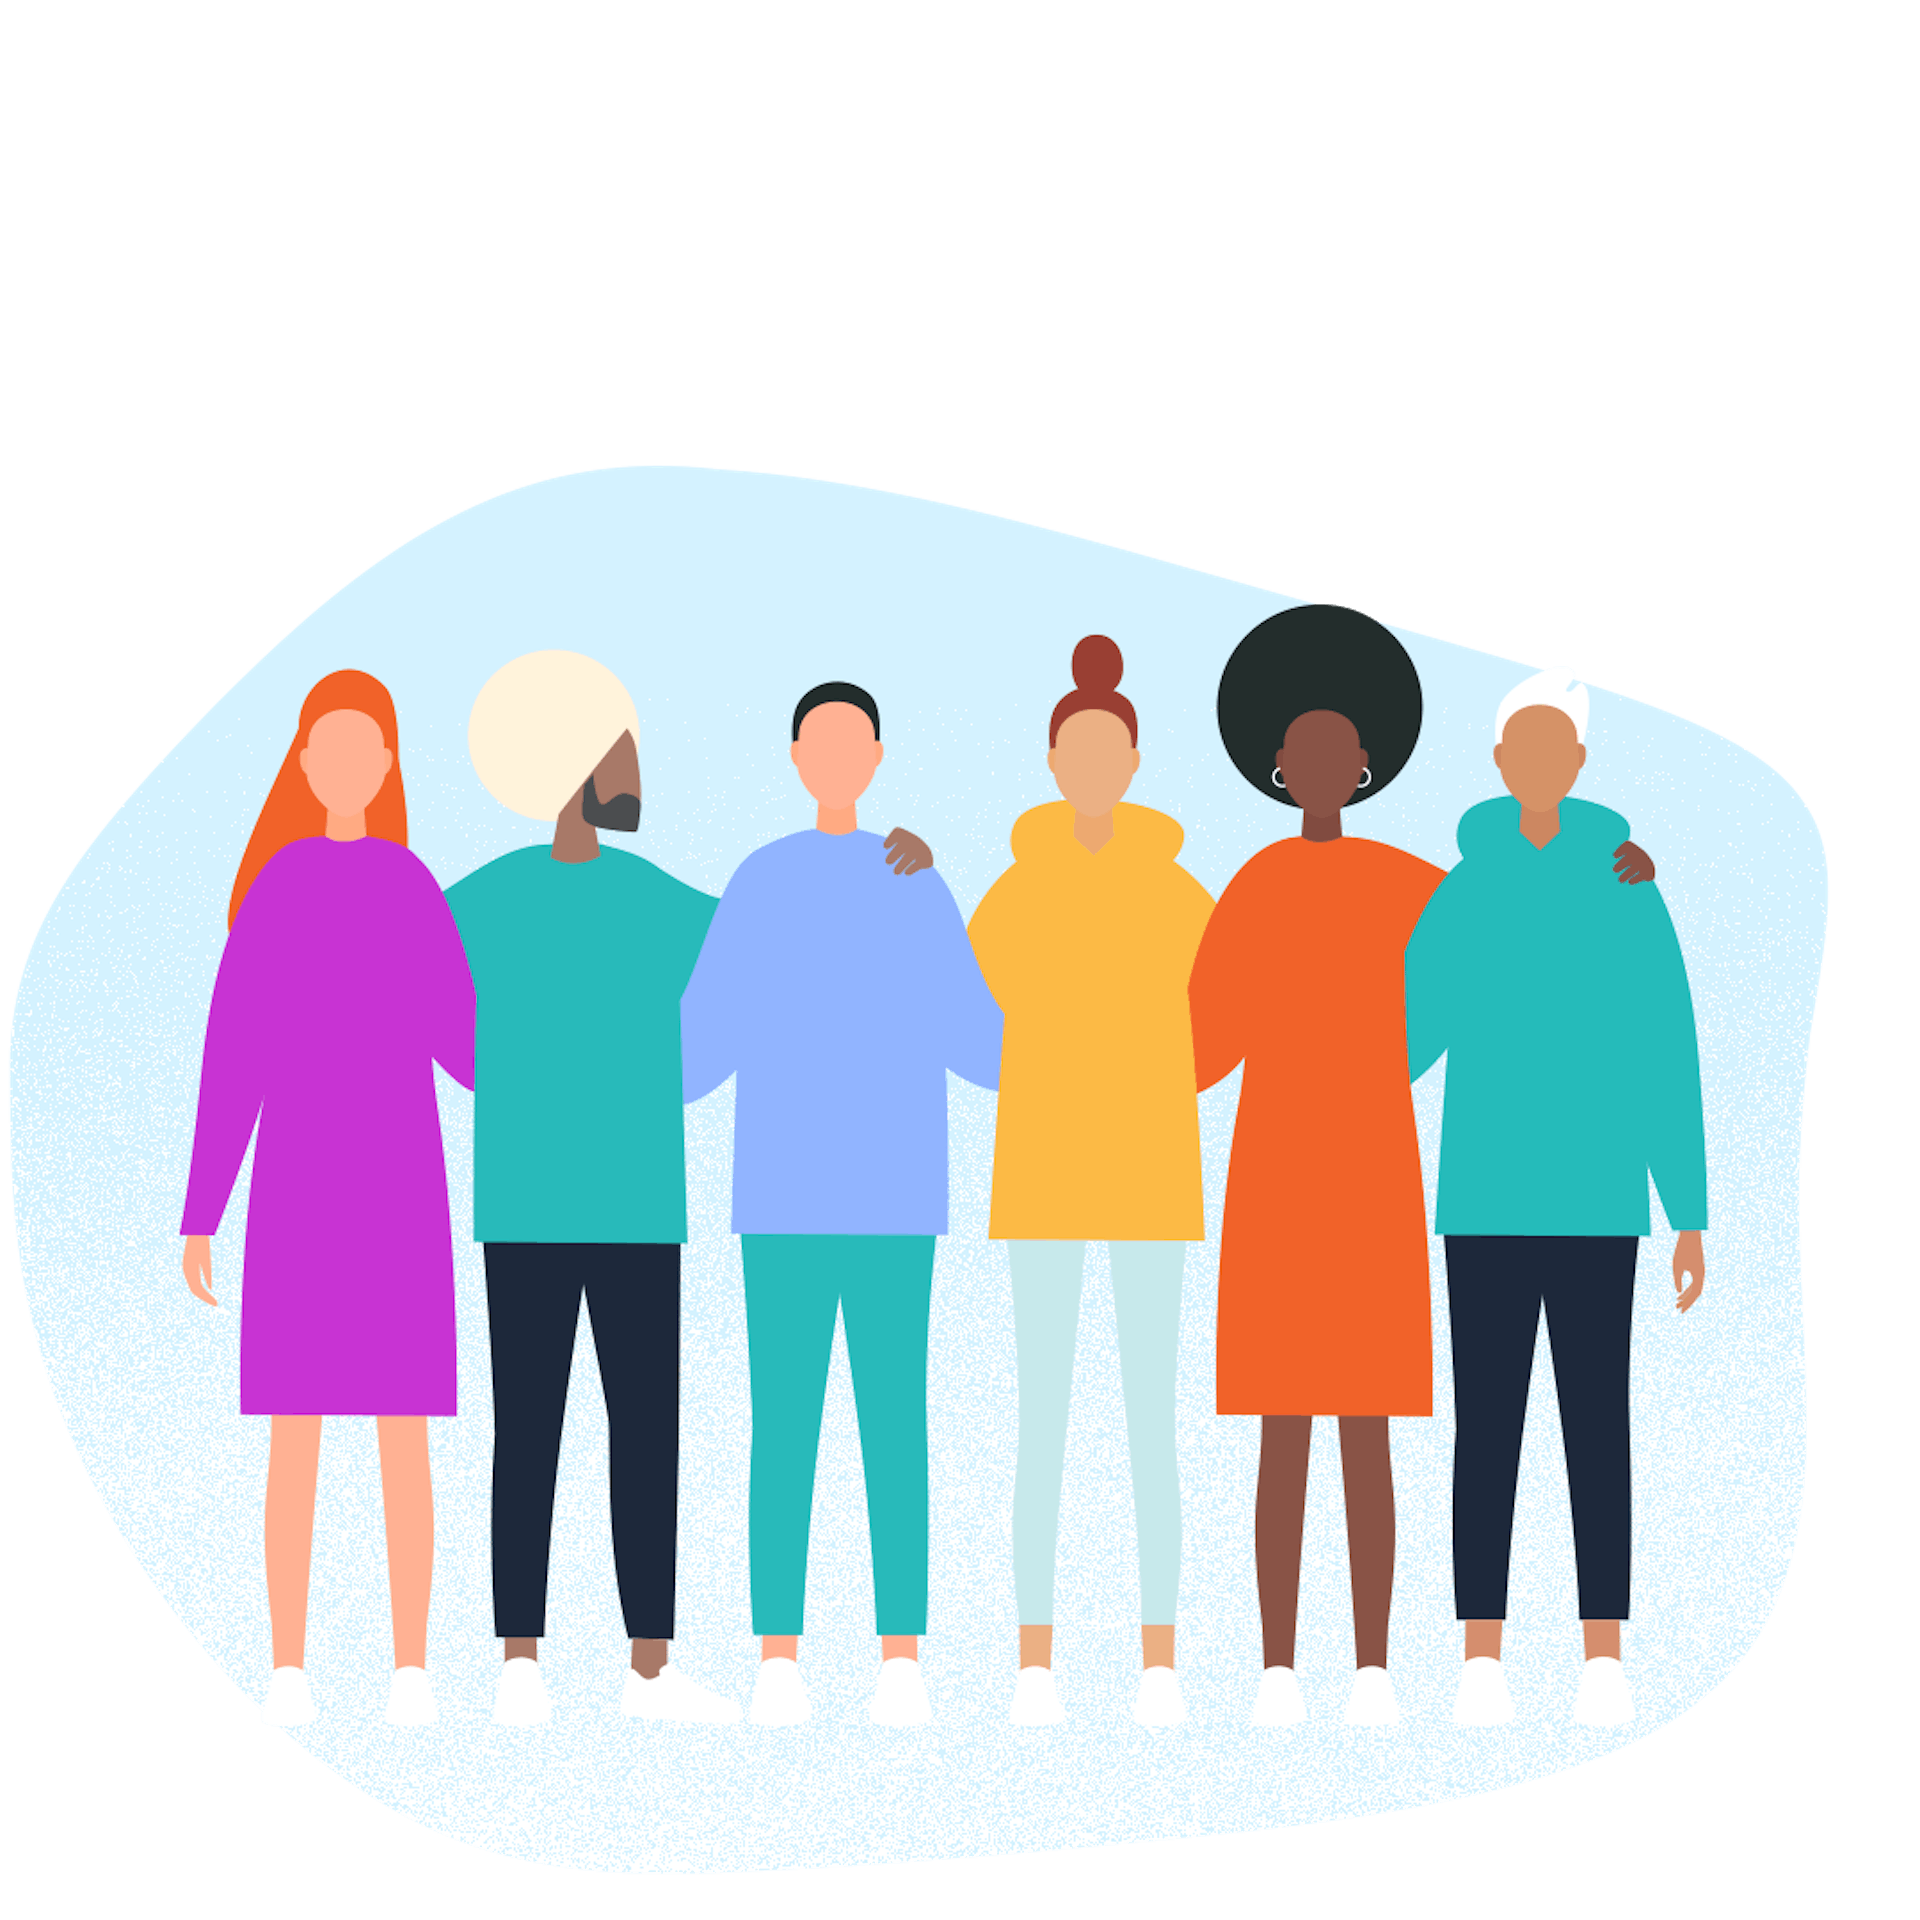 people illustration for diversity, equity, and inclusion